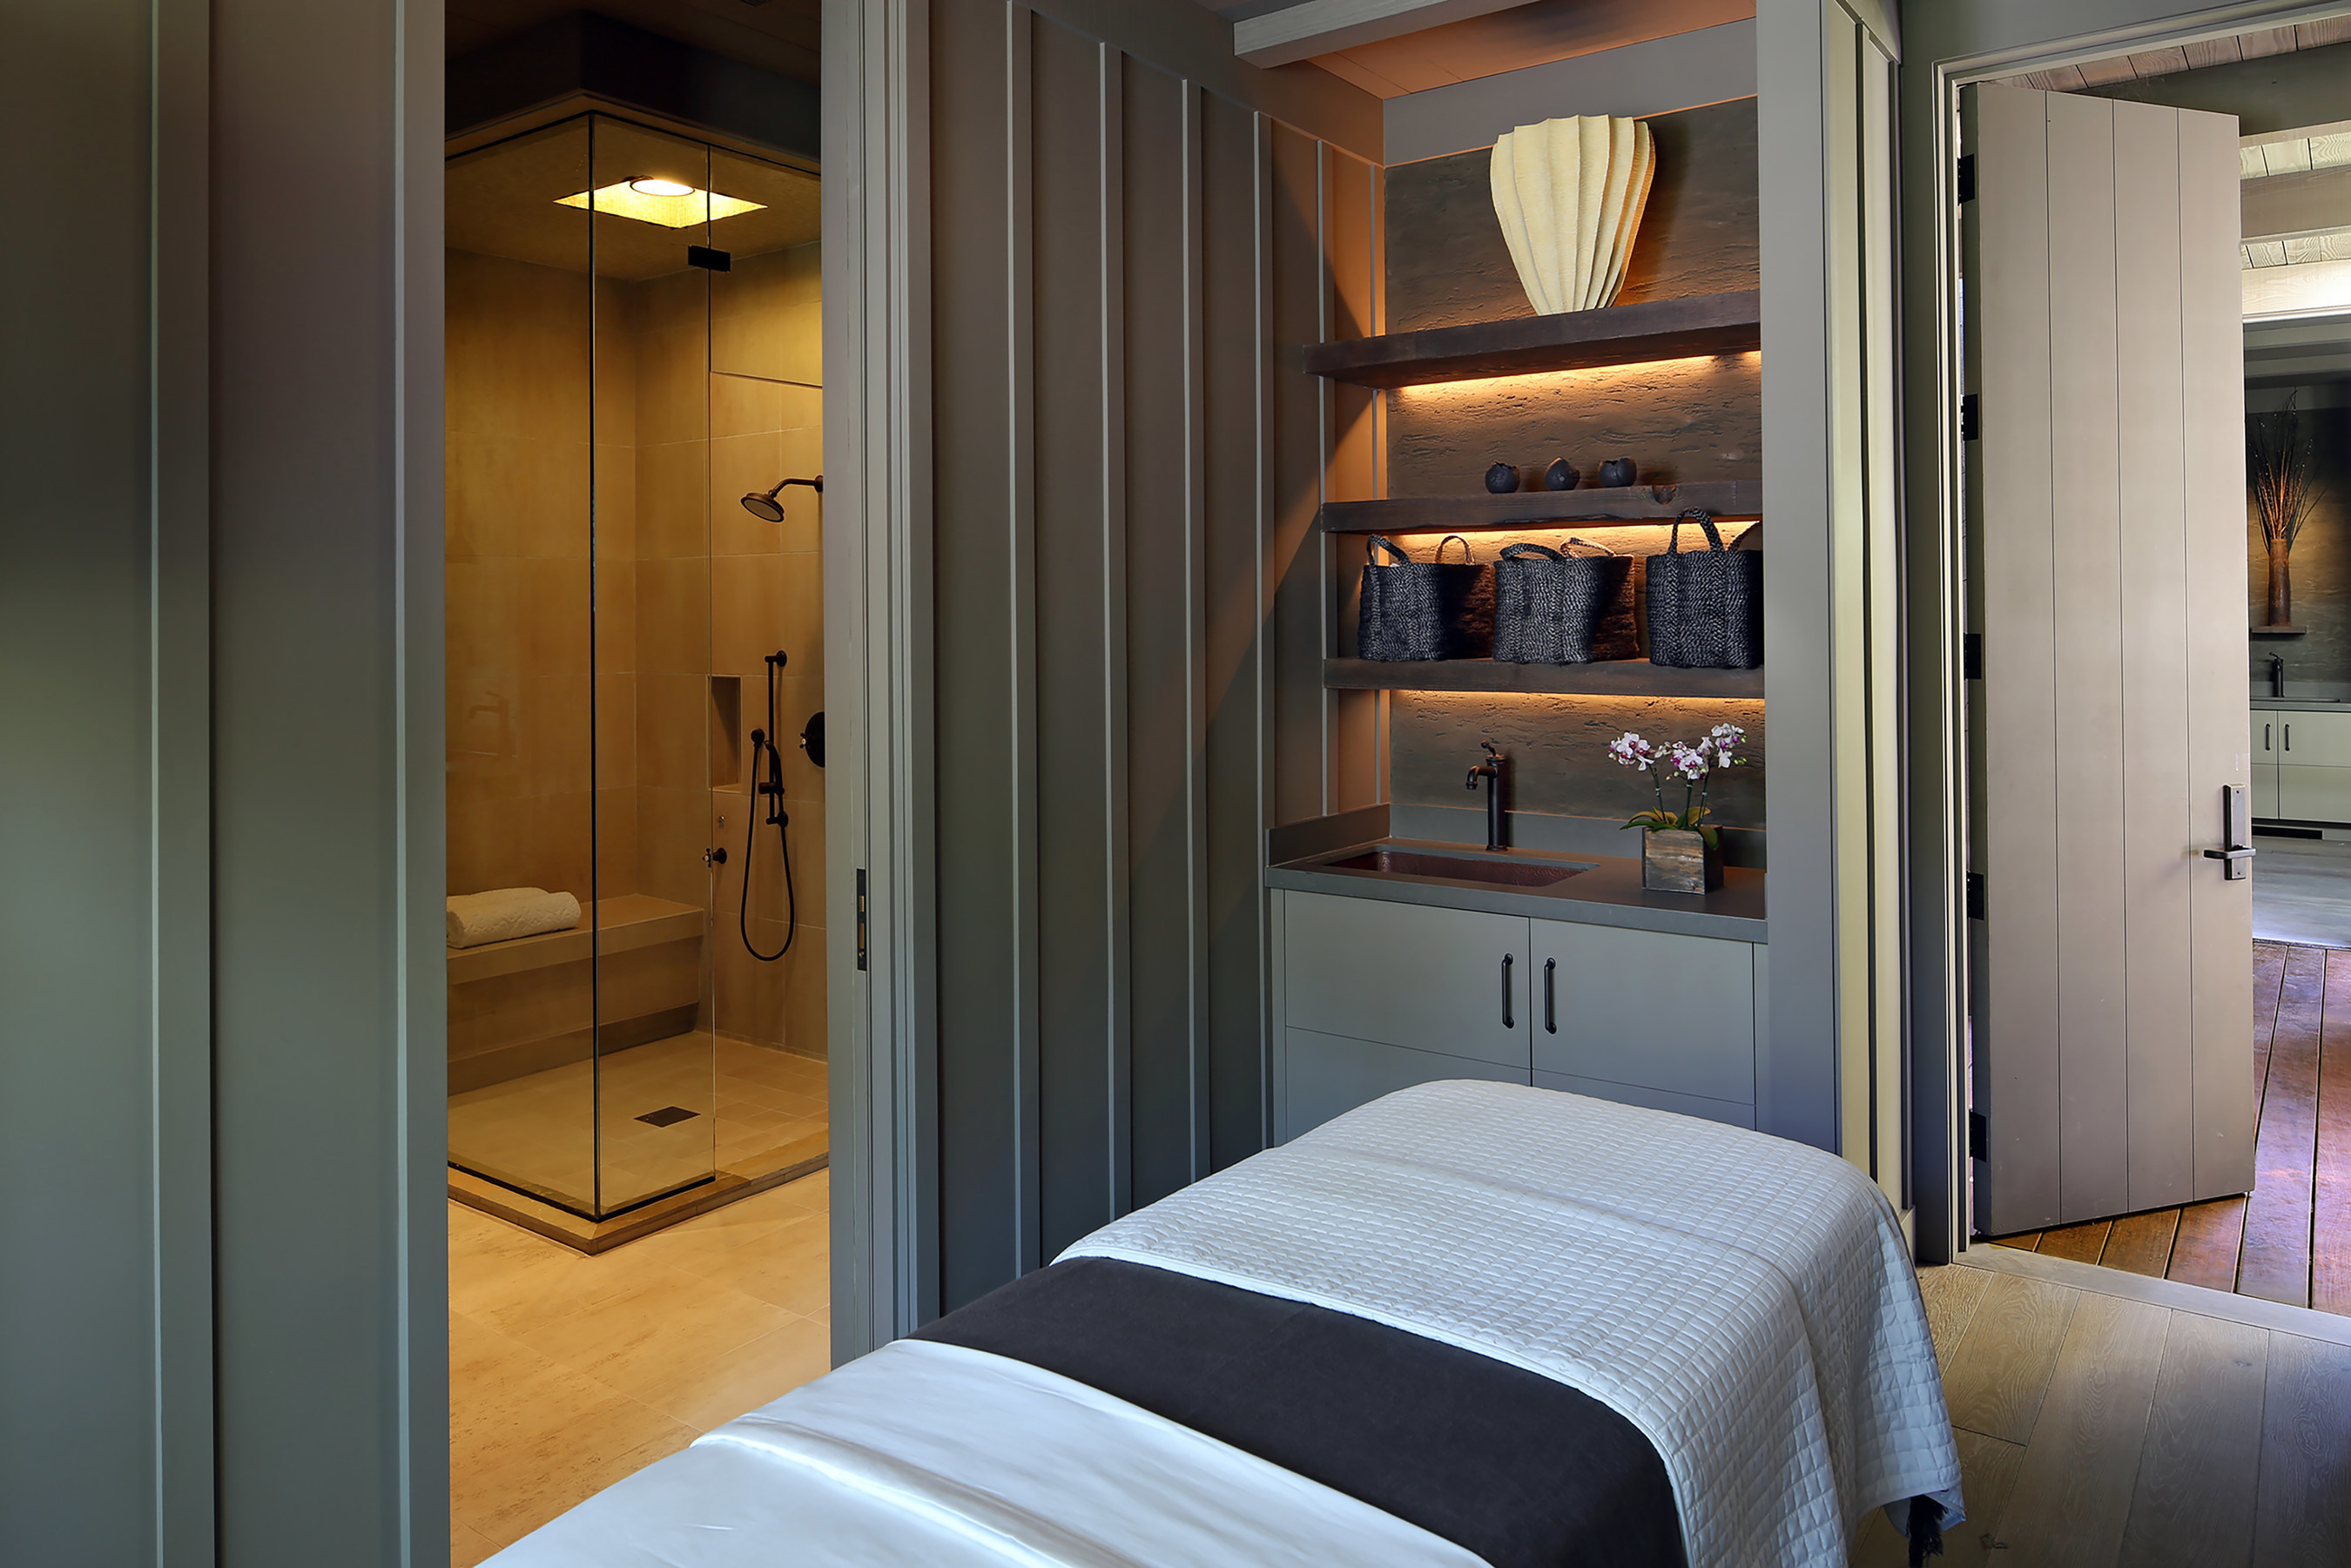 A Single Treatment Suite in the new Meadowood Spa.